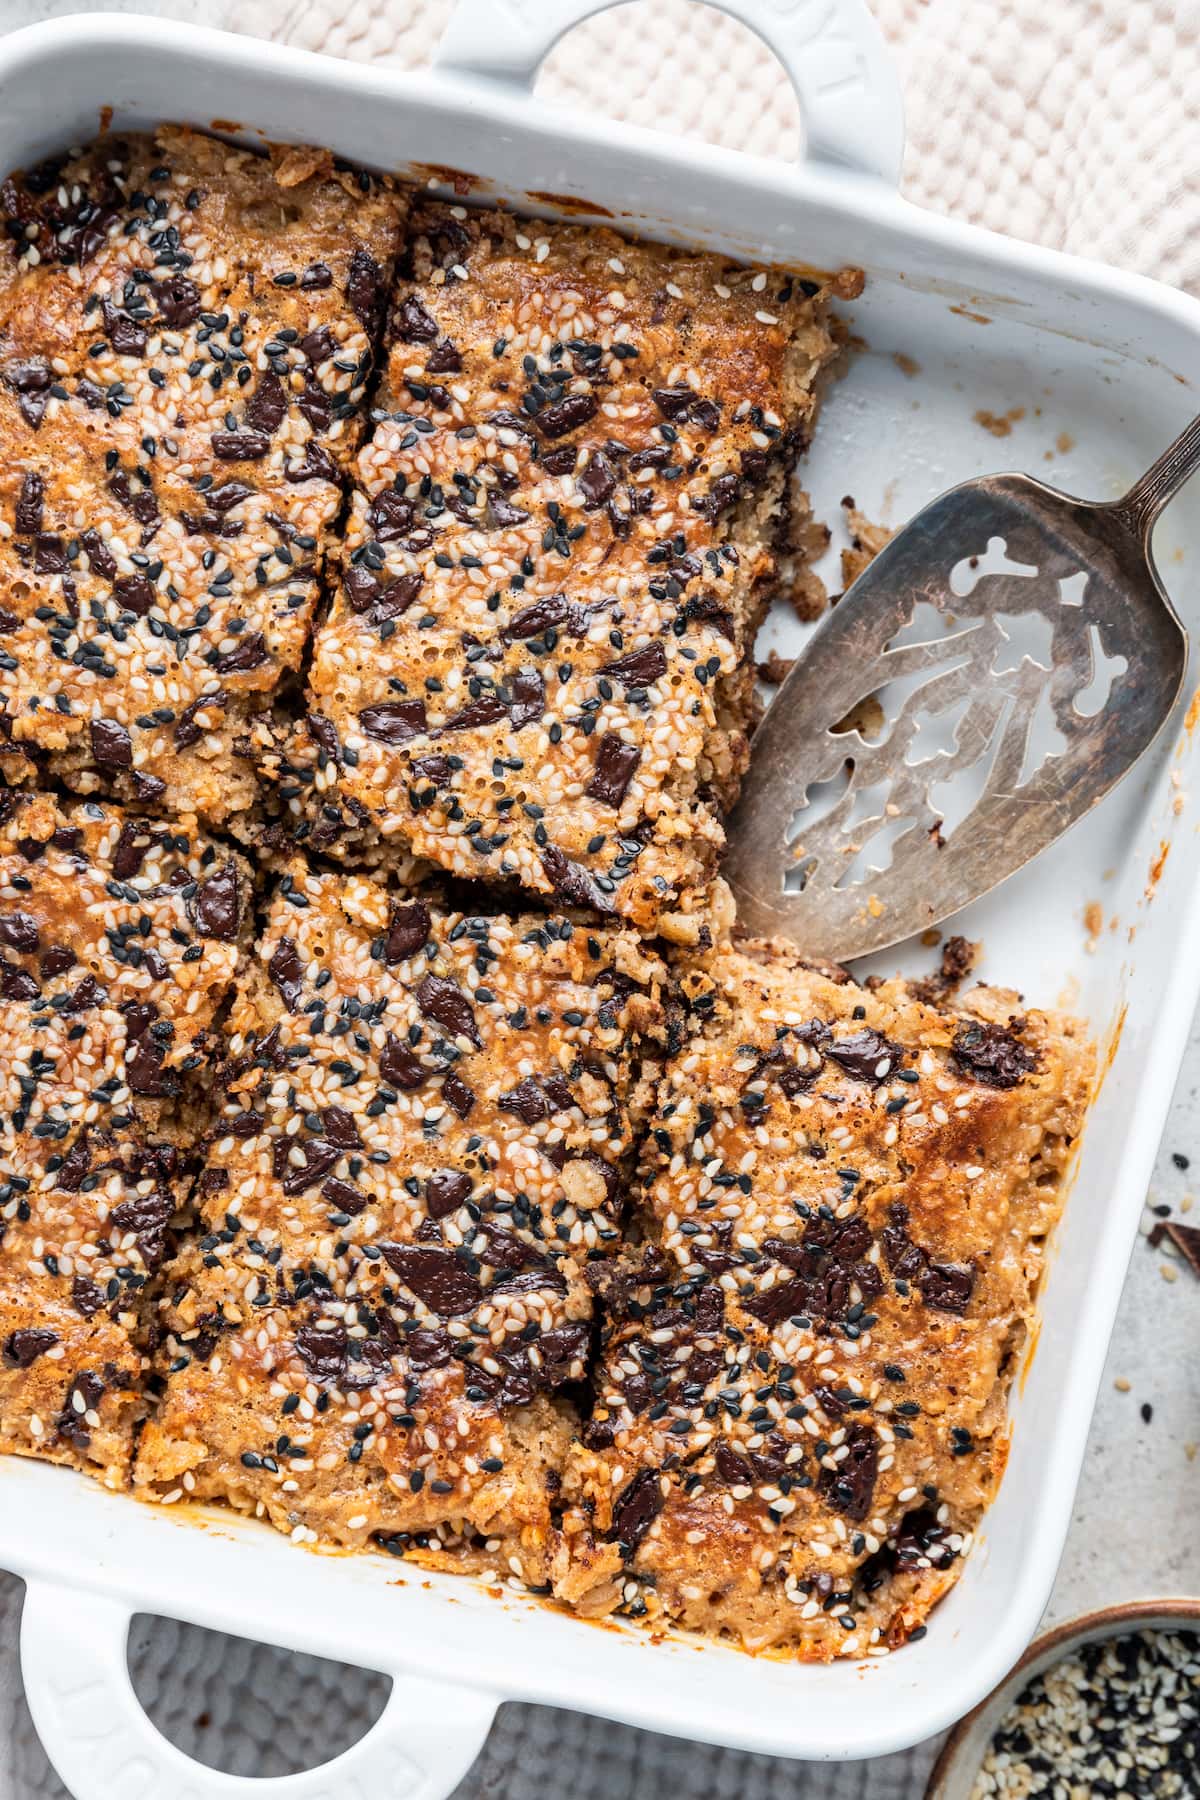 Tahini baked oatmeal in a square baking dish with a metal serving spatula and a piece missing.